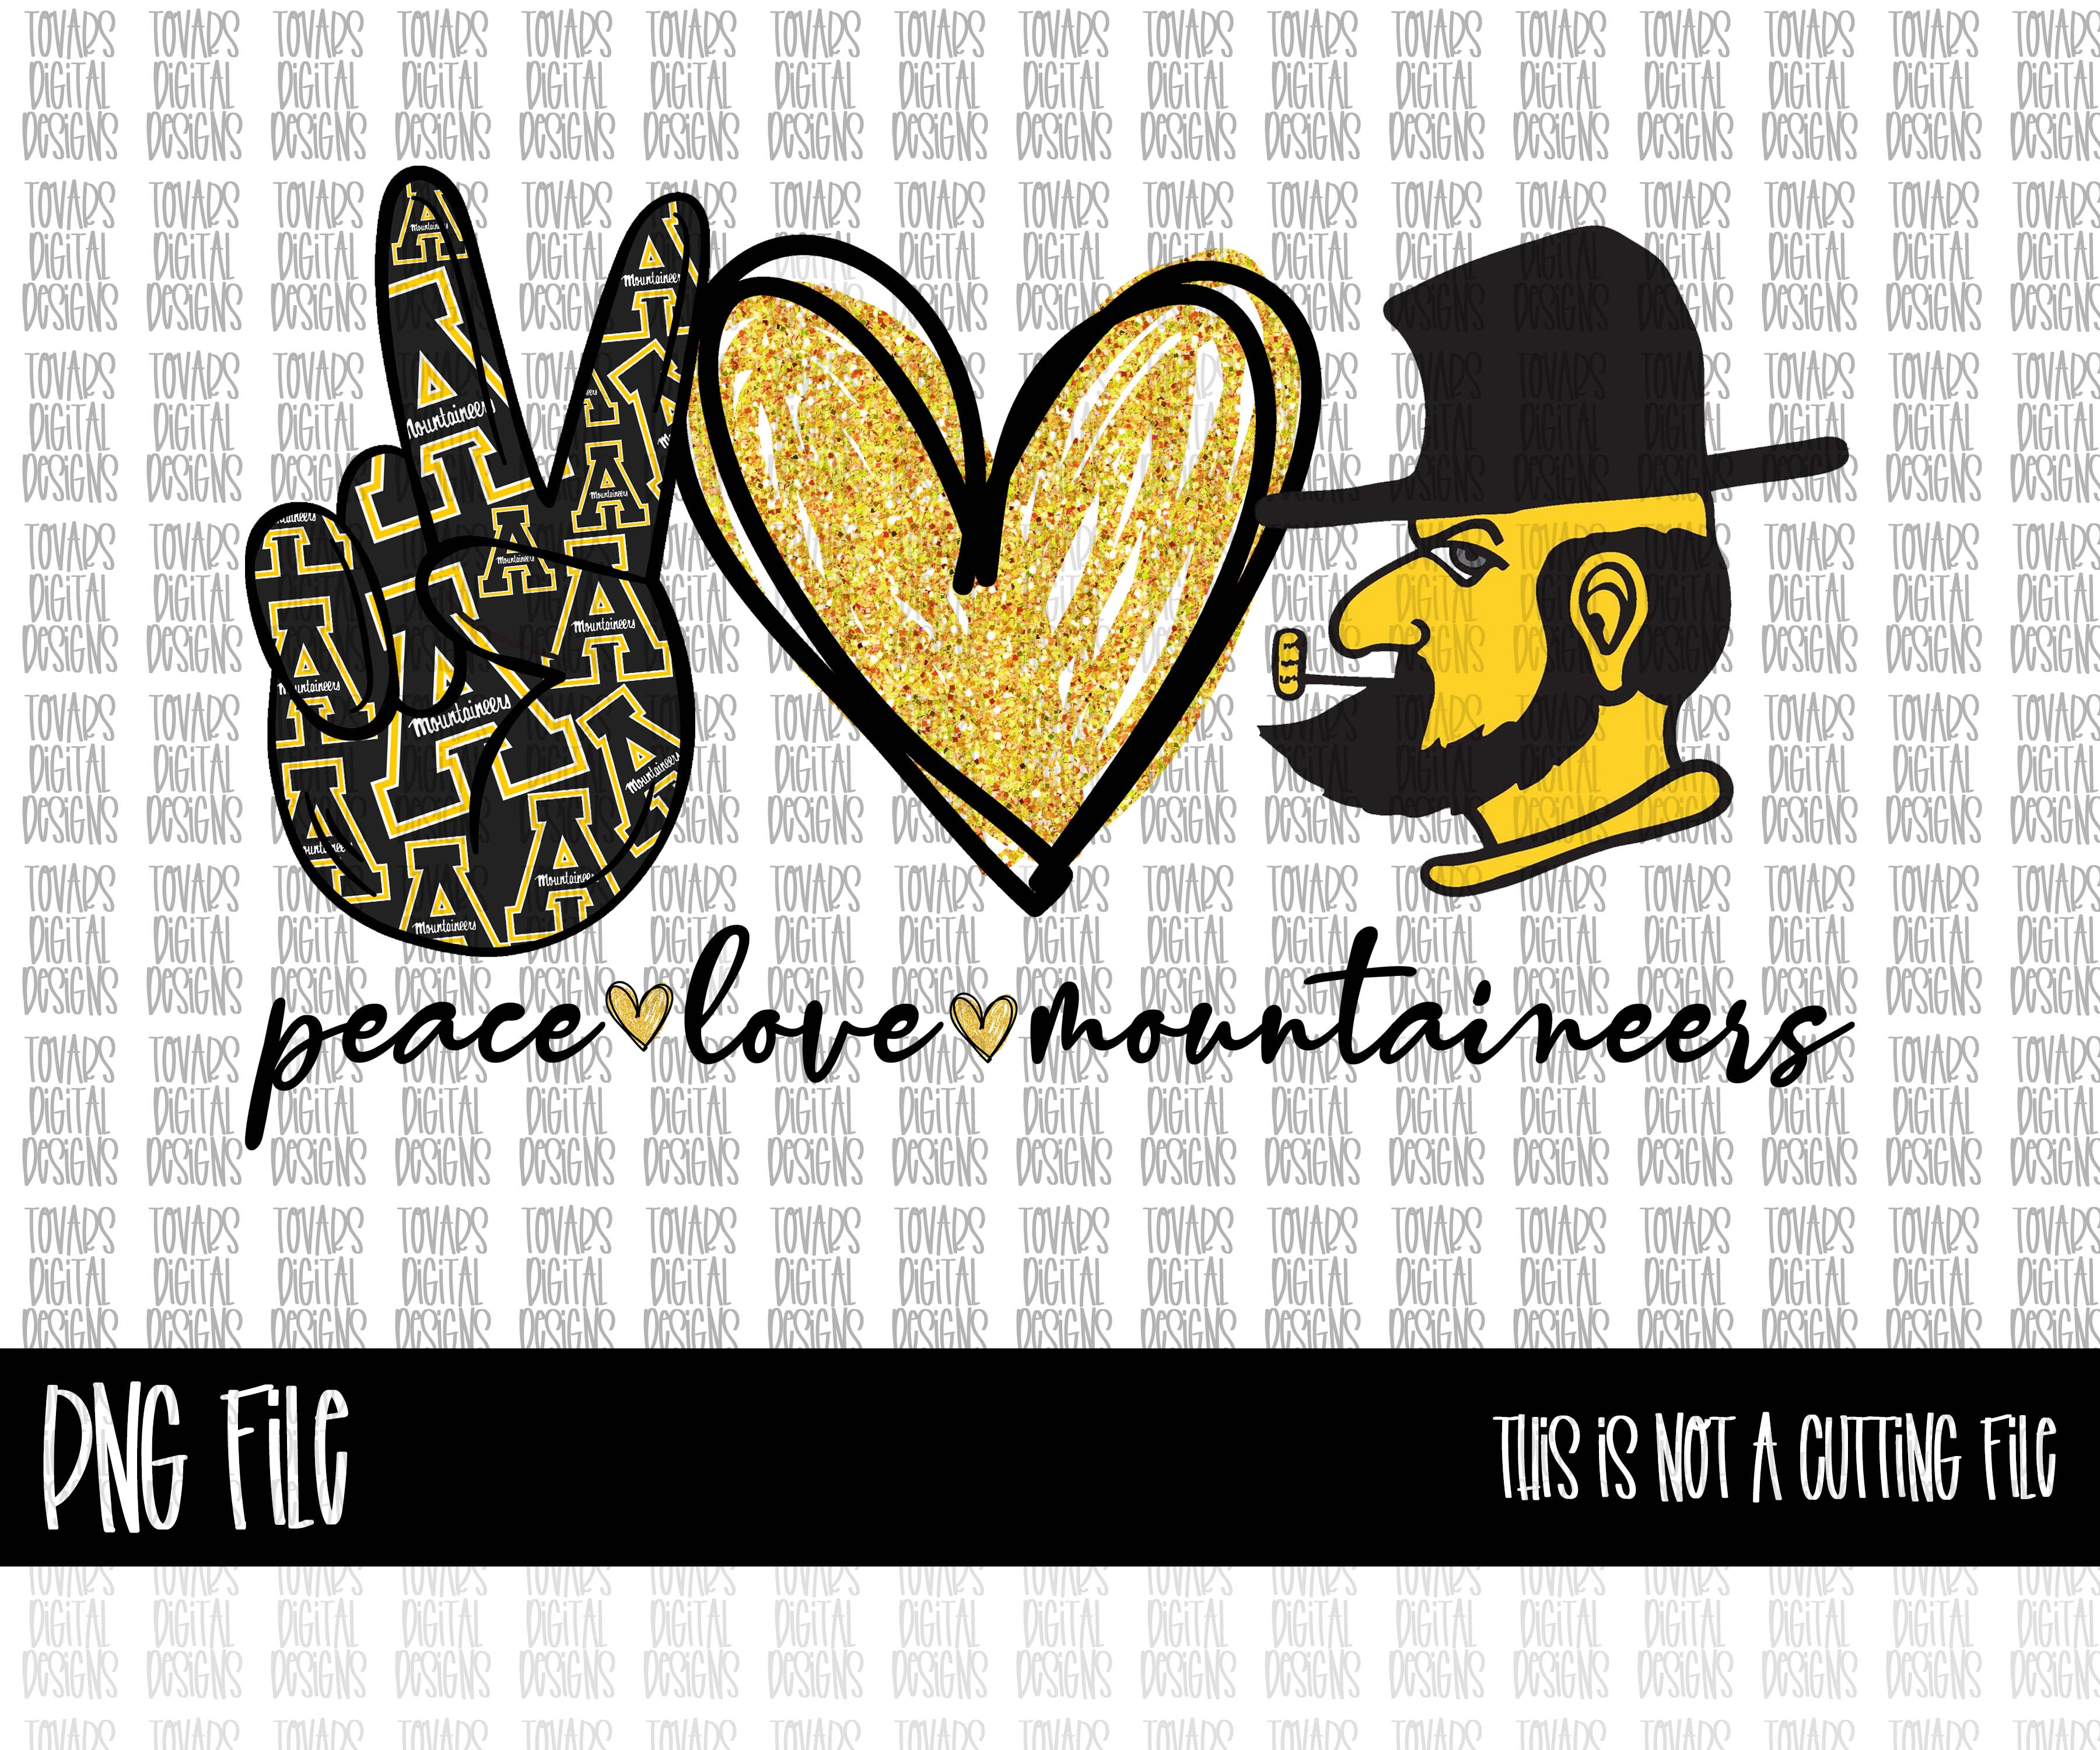 Download Peace Love Mountaineers Png File Tovars Digital Designs